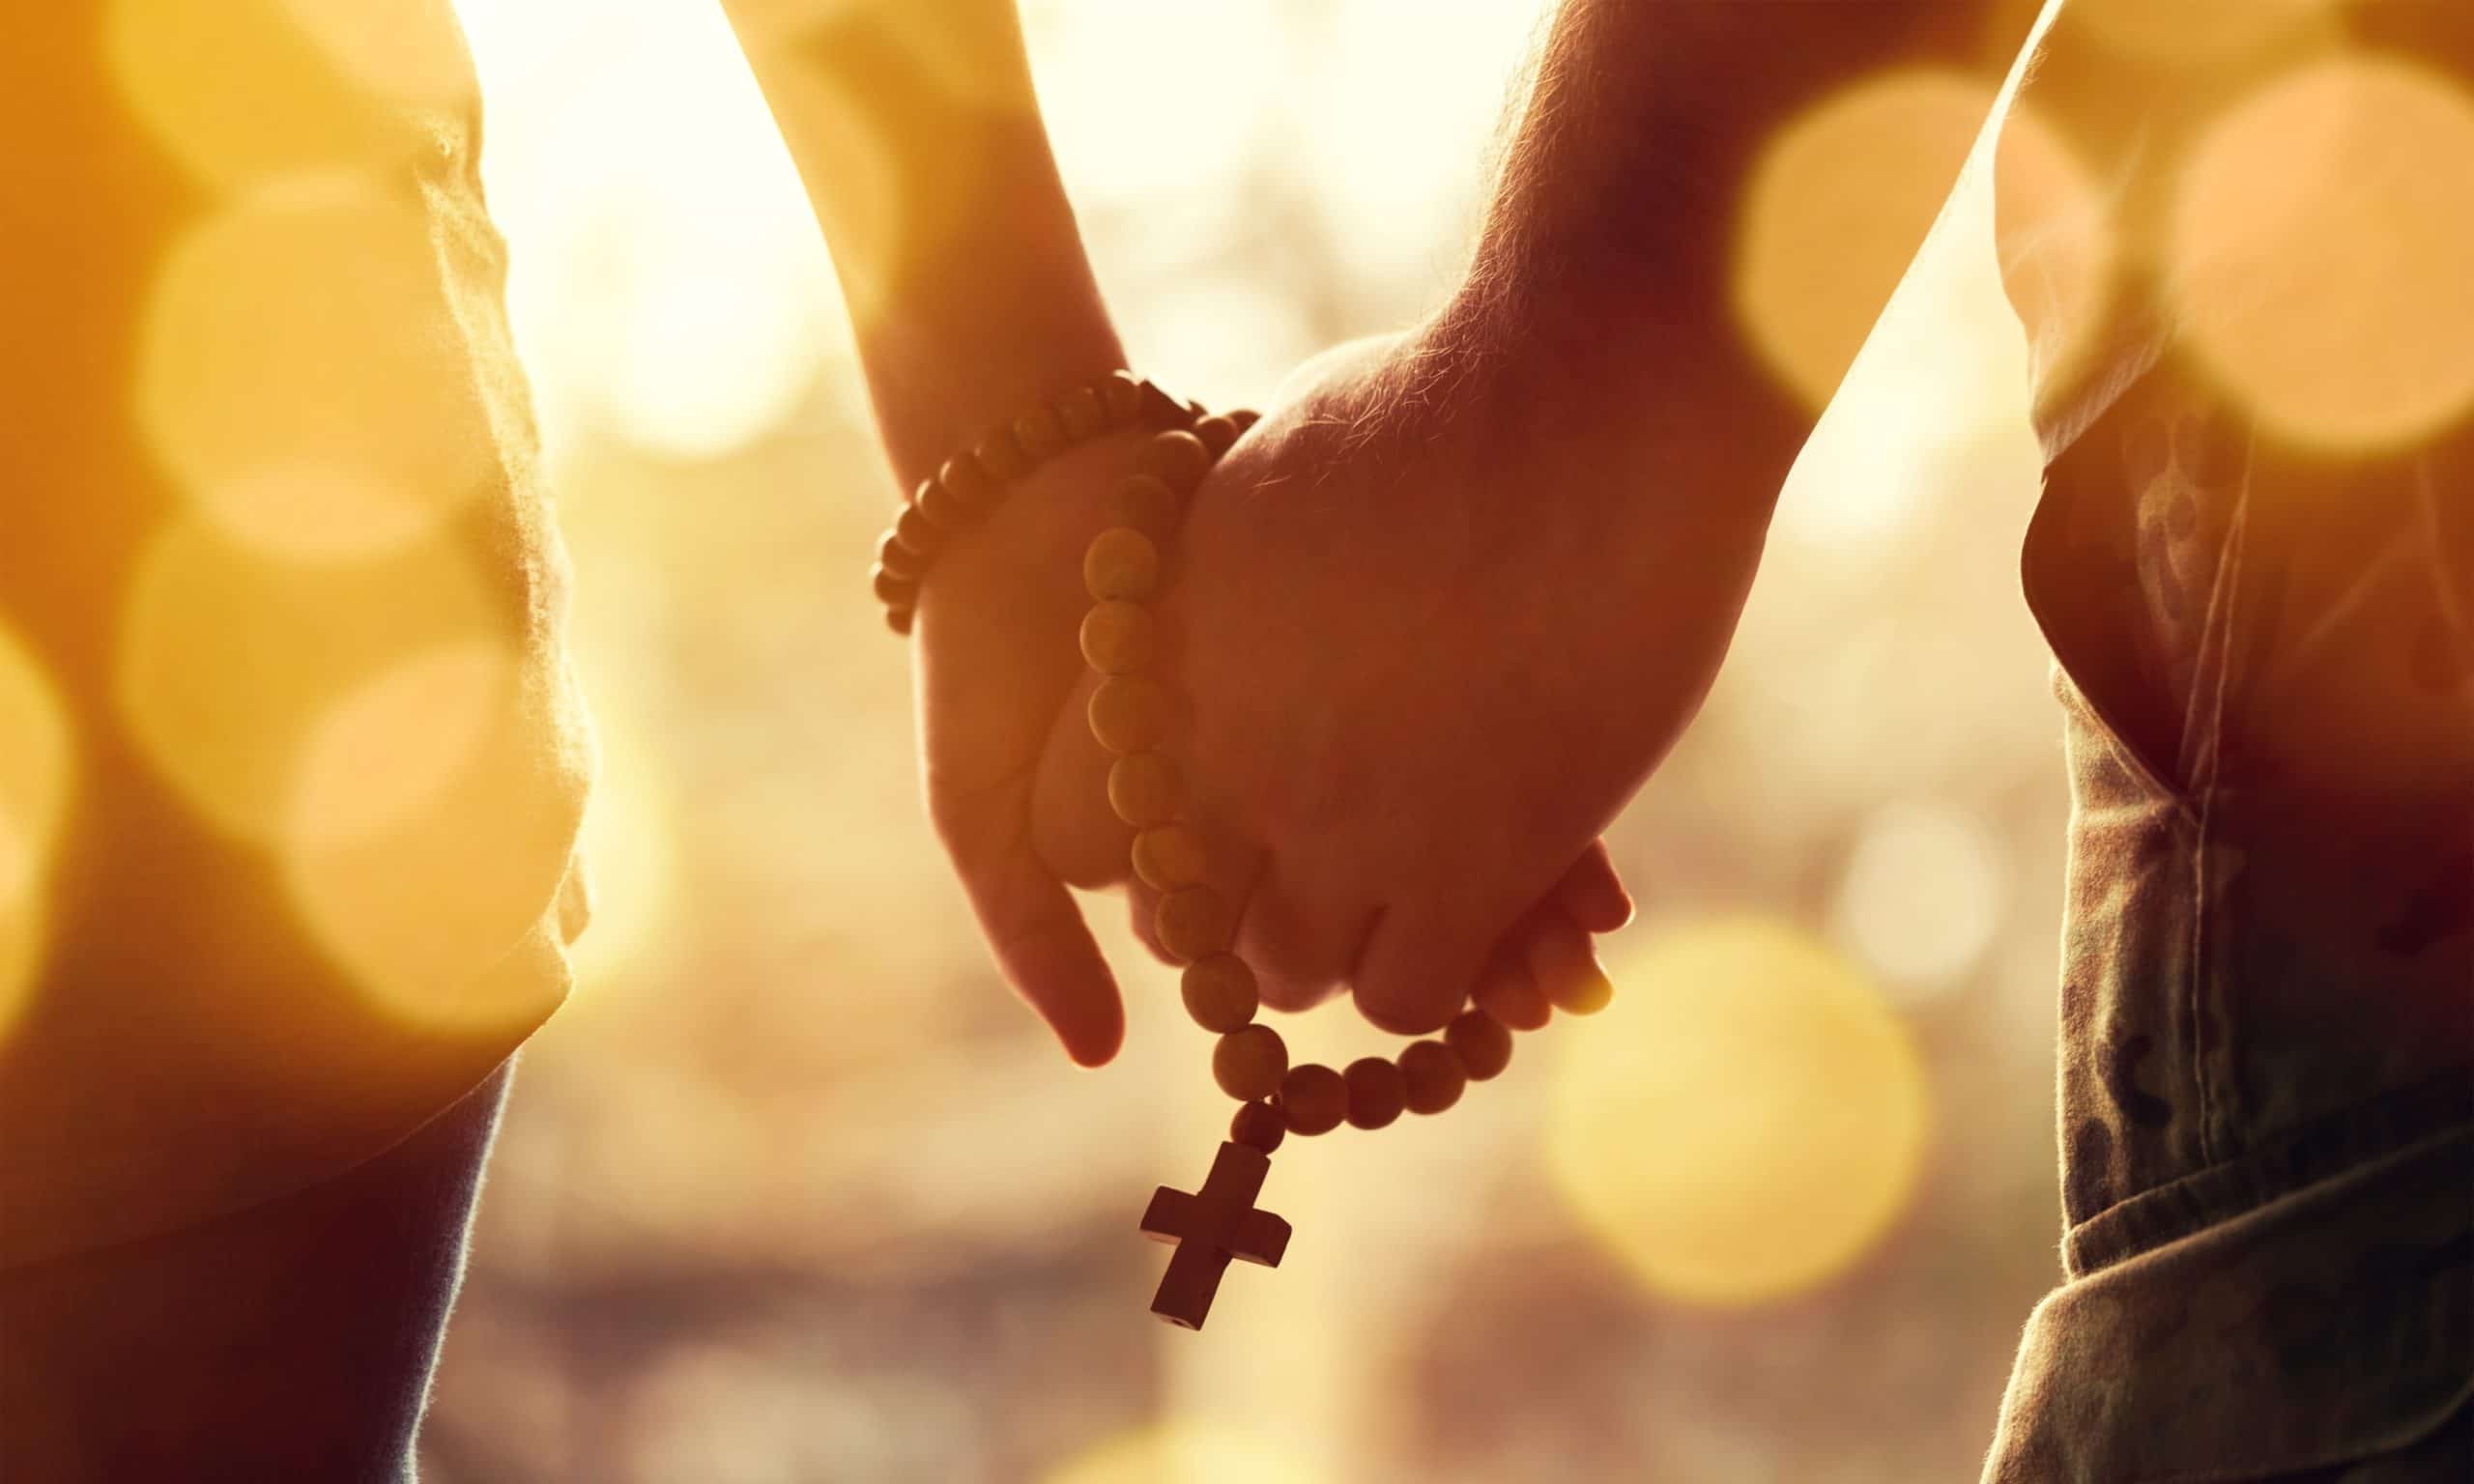 Couple praying together. Holding rosary in hand.